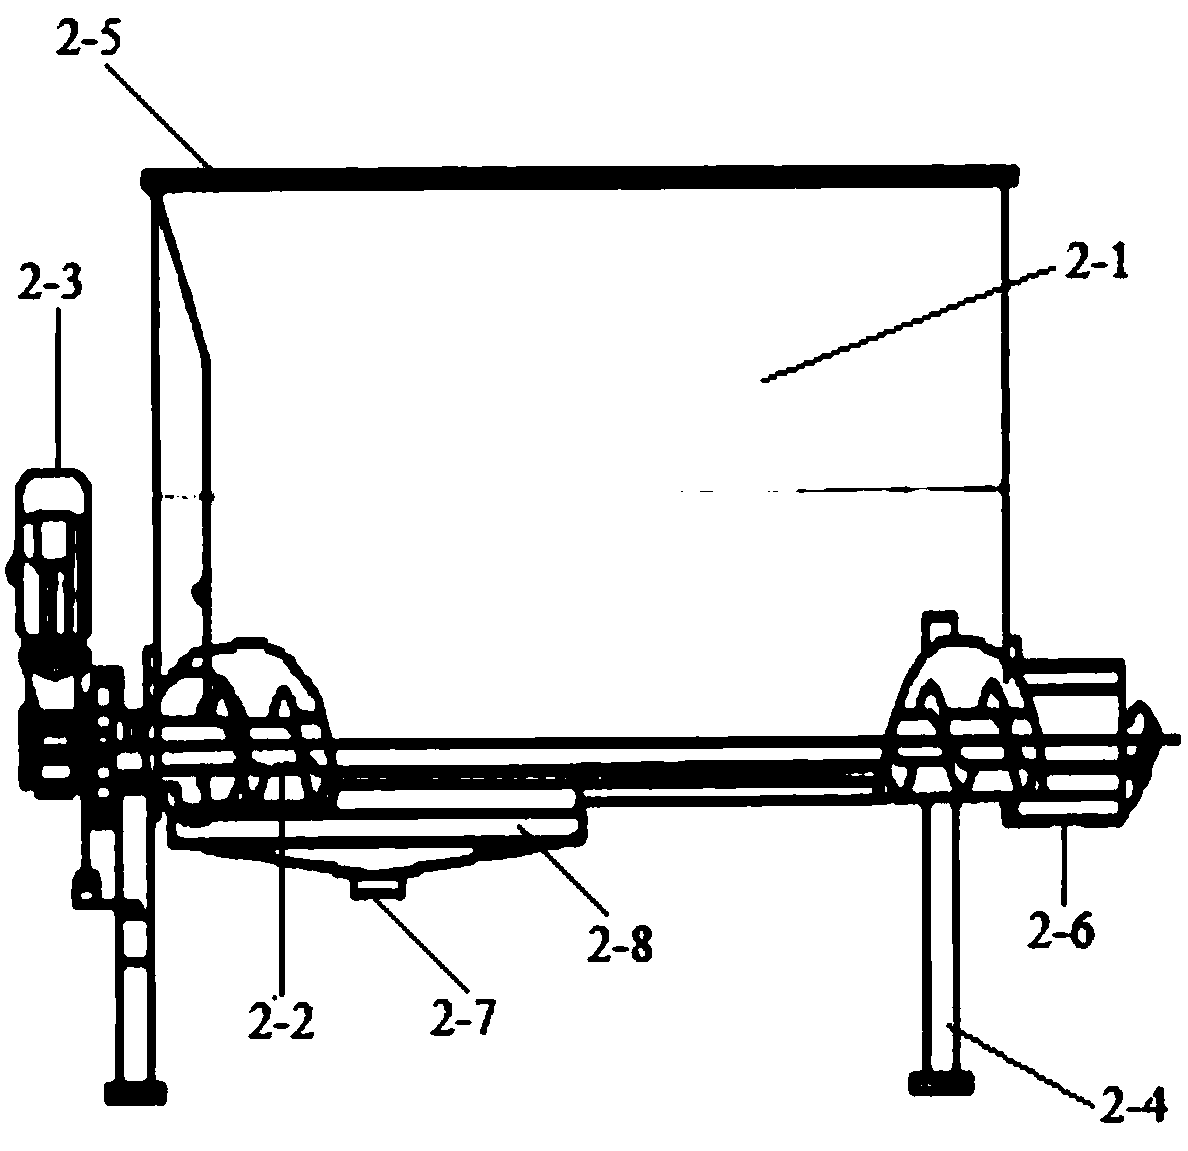 Extraction device used for paper-making reconstituted tobacco and technology for preparing reconstituted tobacco